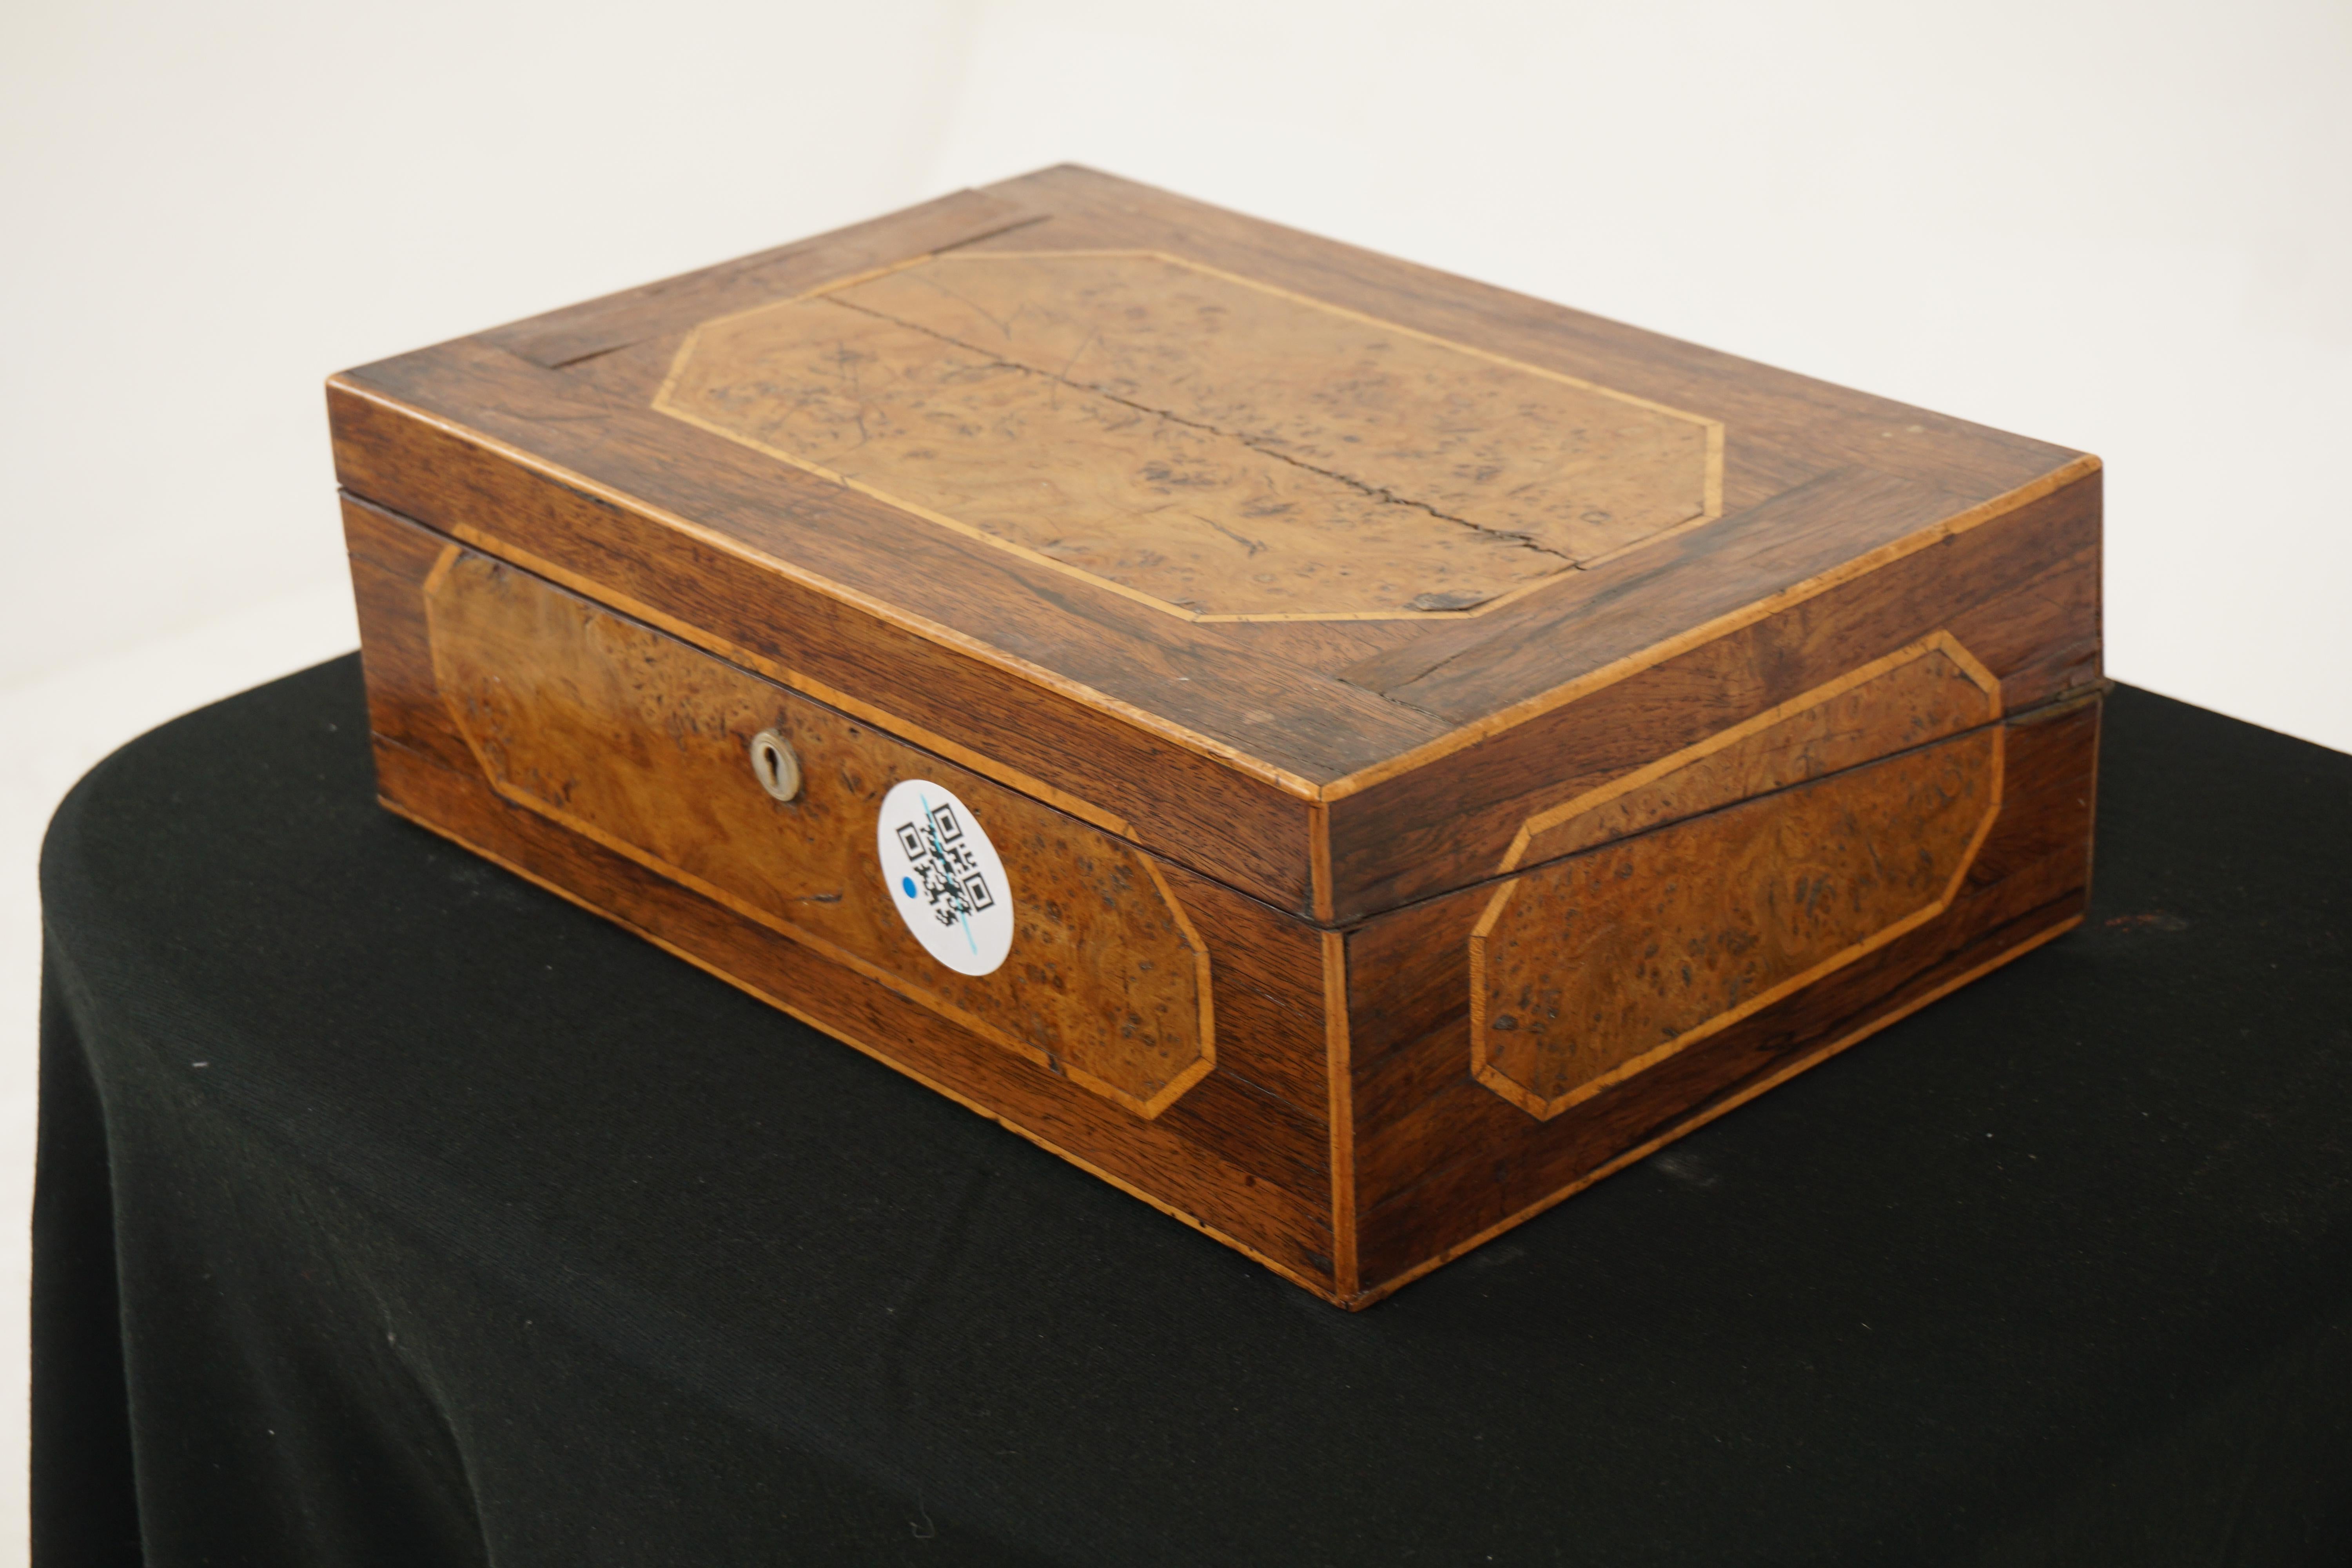 Antique Victorian inlaid wood with pollard oak writing box, Scotland 1870, H170


Scotland 1870
Wood and Pollard Oak
Original finish
Rectangular top with pollard oak inlay
With left up lid that reveals a red velvet writing surface
Filled with two